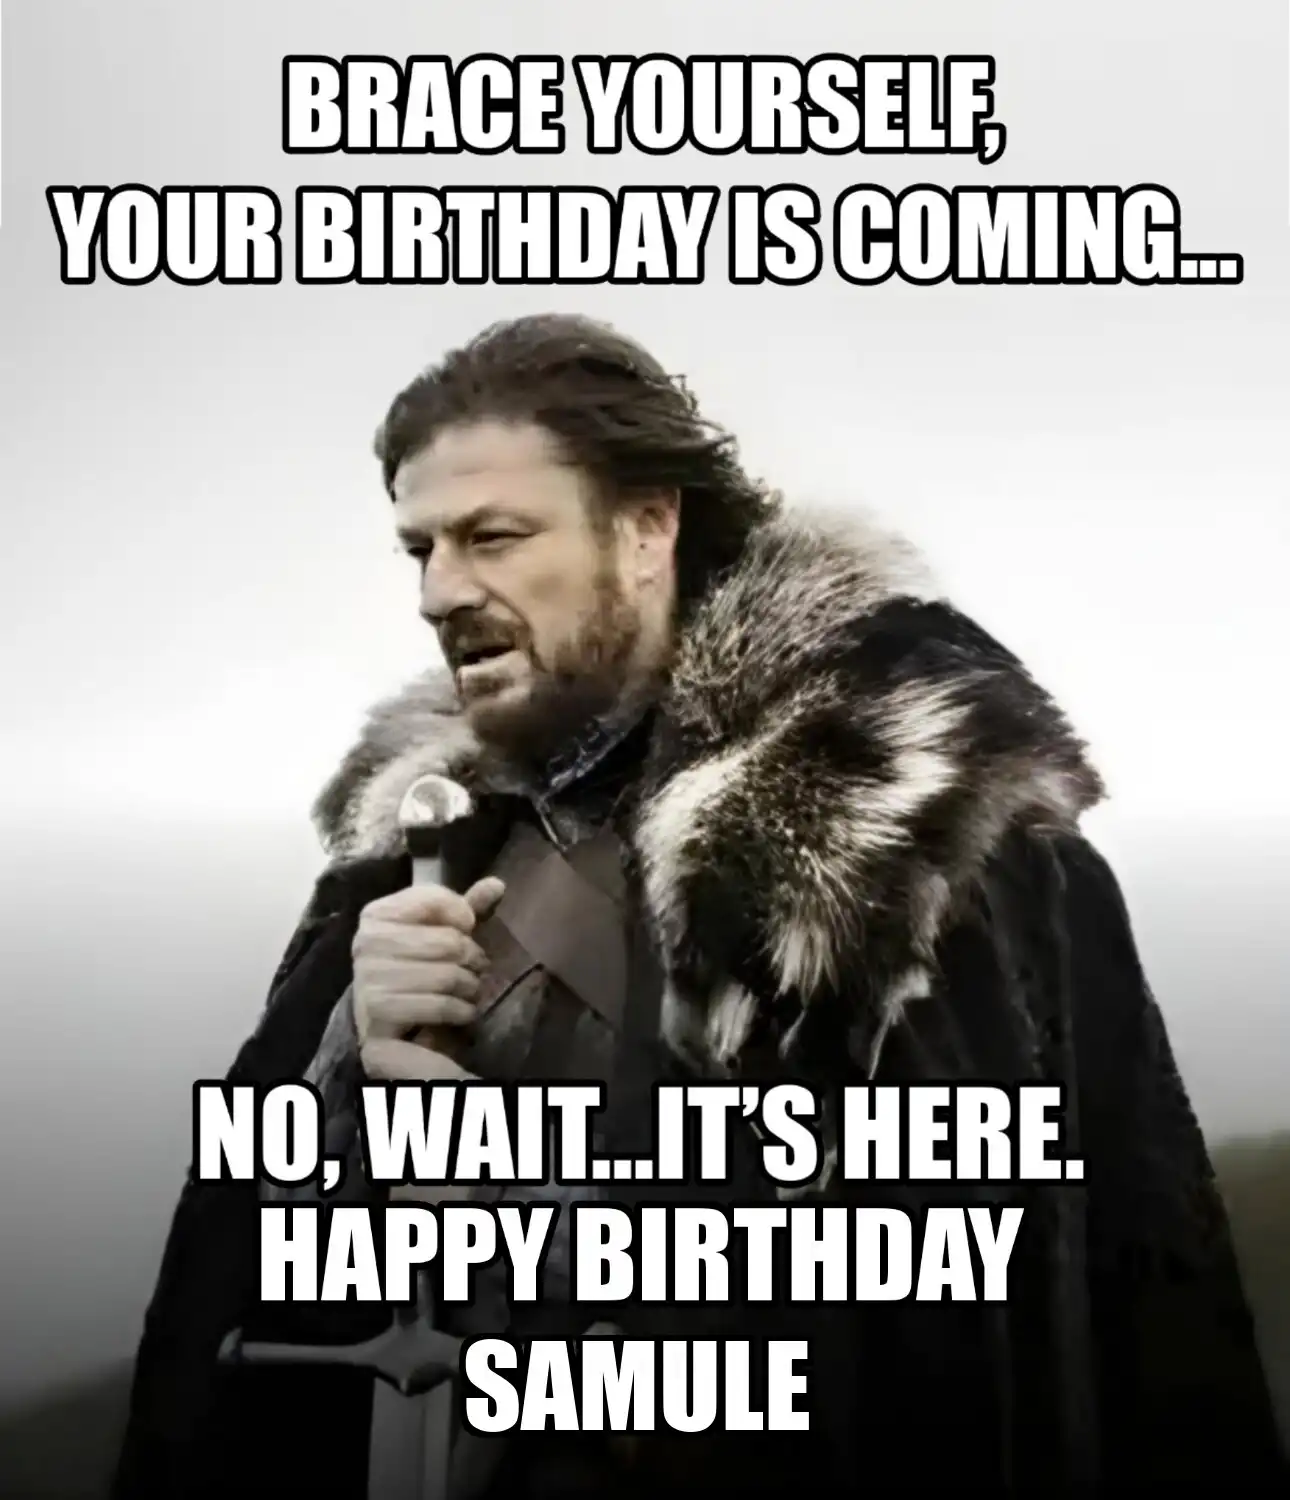 Happy Birthday Samule Brace Yourself Your Birthday Is Coming Meme